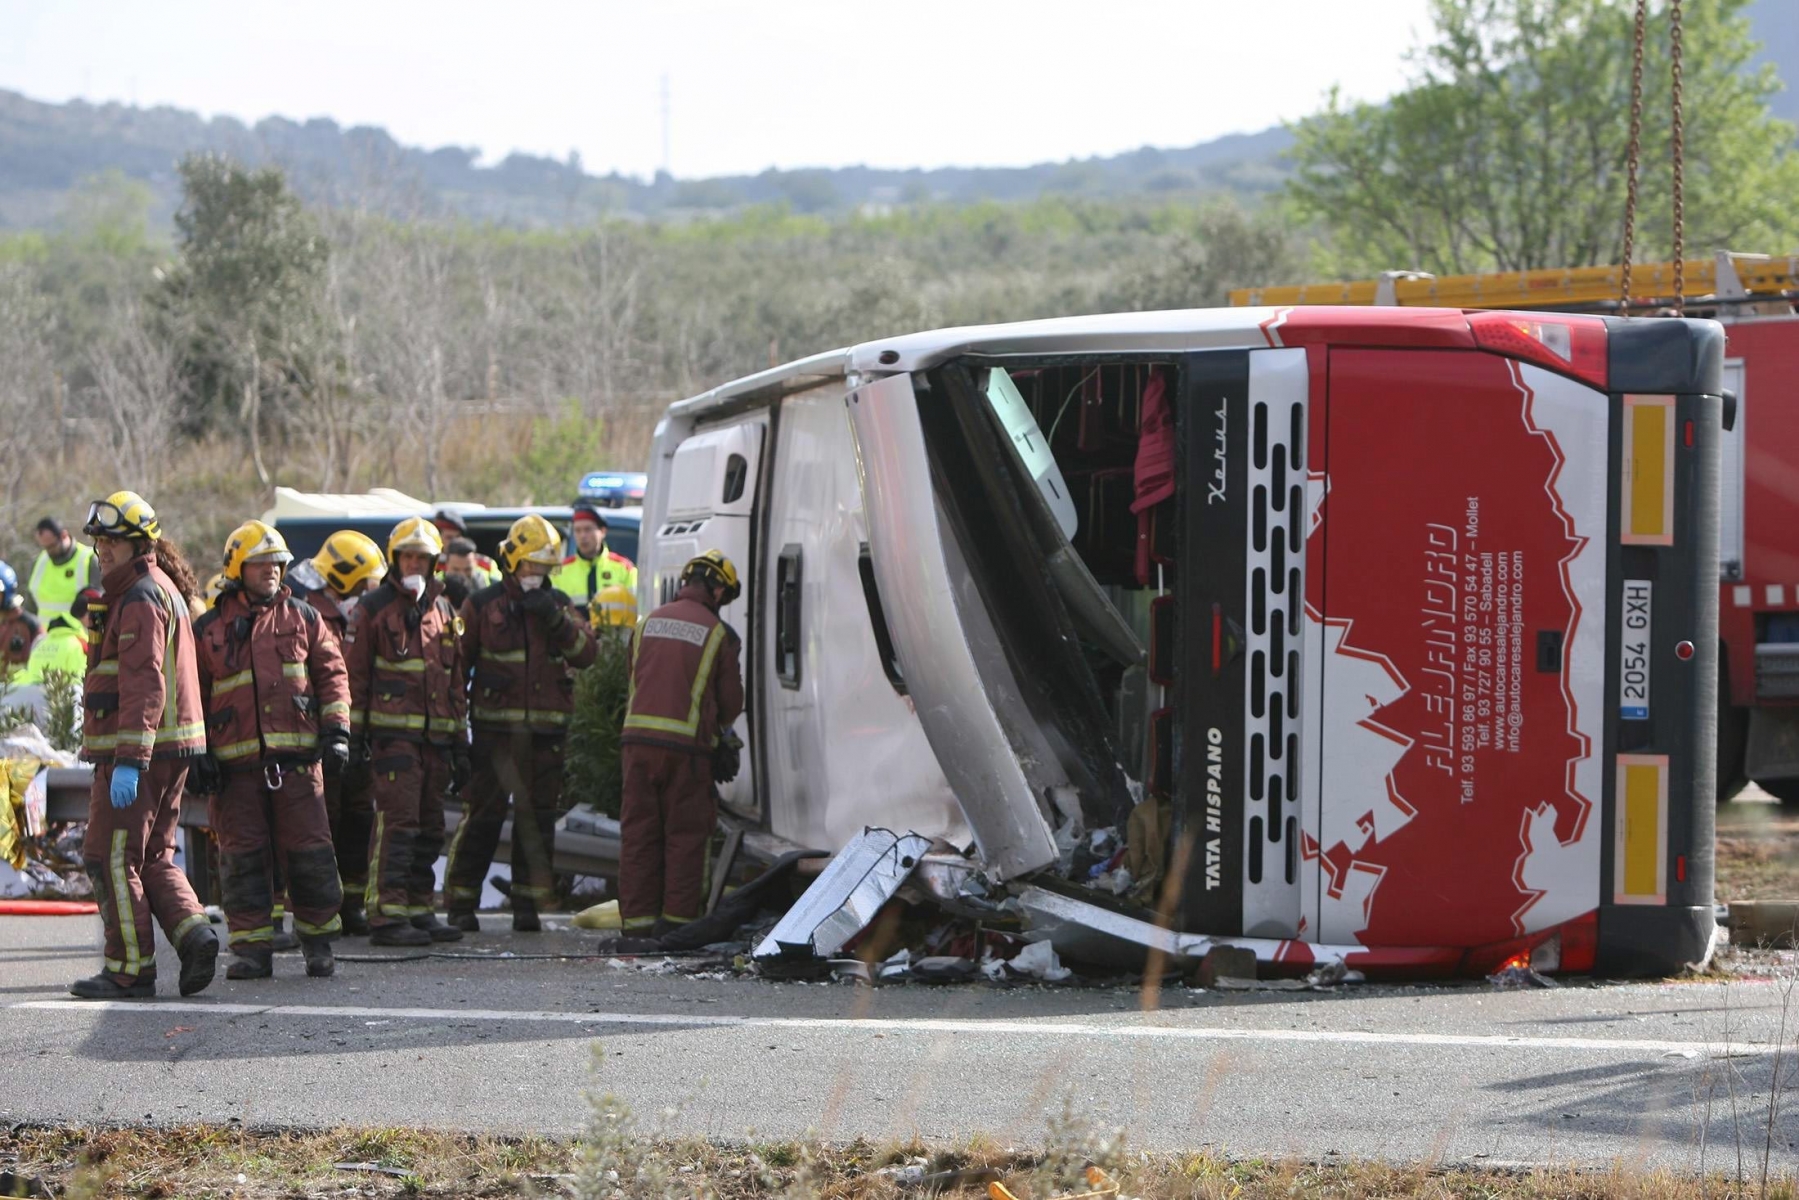 epa05222061 Firemen work at the site of a coach crash that has left at least 14 students dead at the AP-7 motorway in Freginals, in the province of Tarragona, northeastern Spain, 20 March 2016. The coach carrying dozens of Erasmus students collided with a car and overturned. The students from several different countries were heading to Barcelona after attending Las Fallas Festival in Valencia, eastern Spain.  EPA/JAUME SELLART